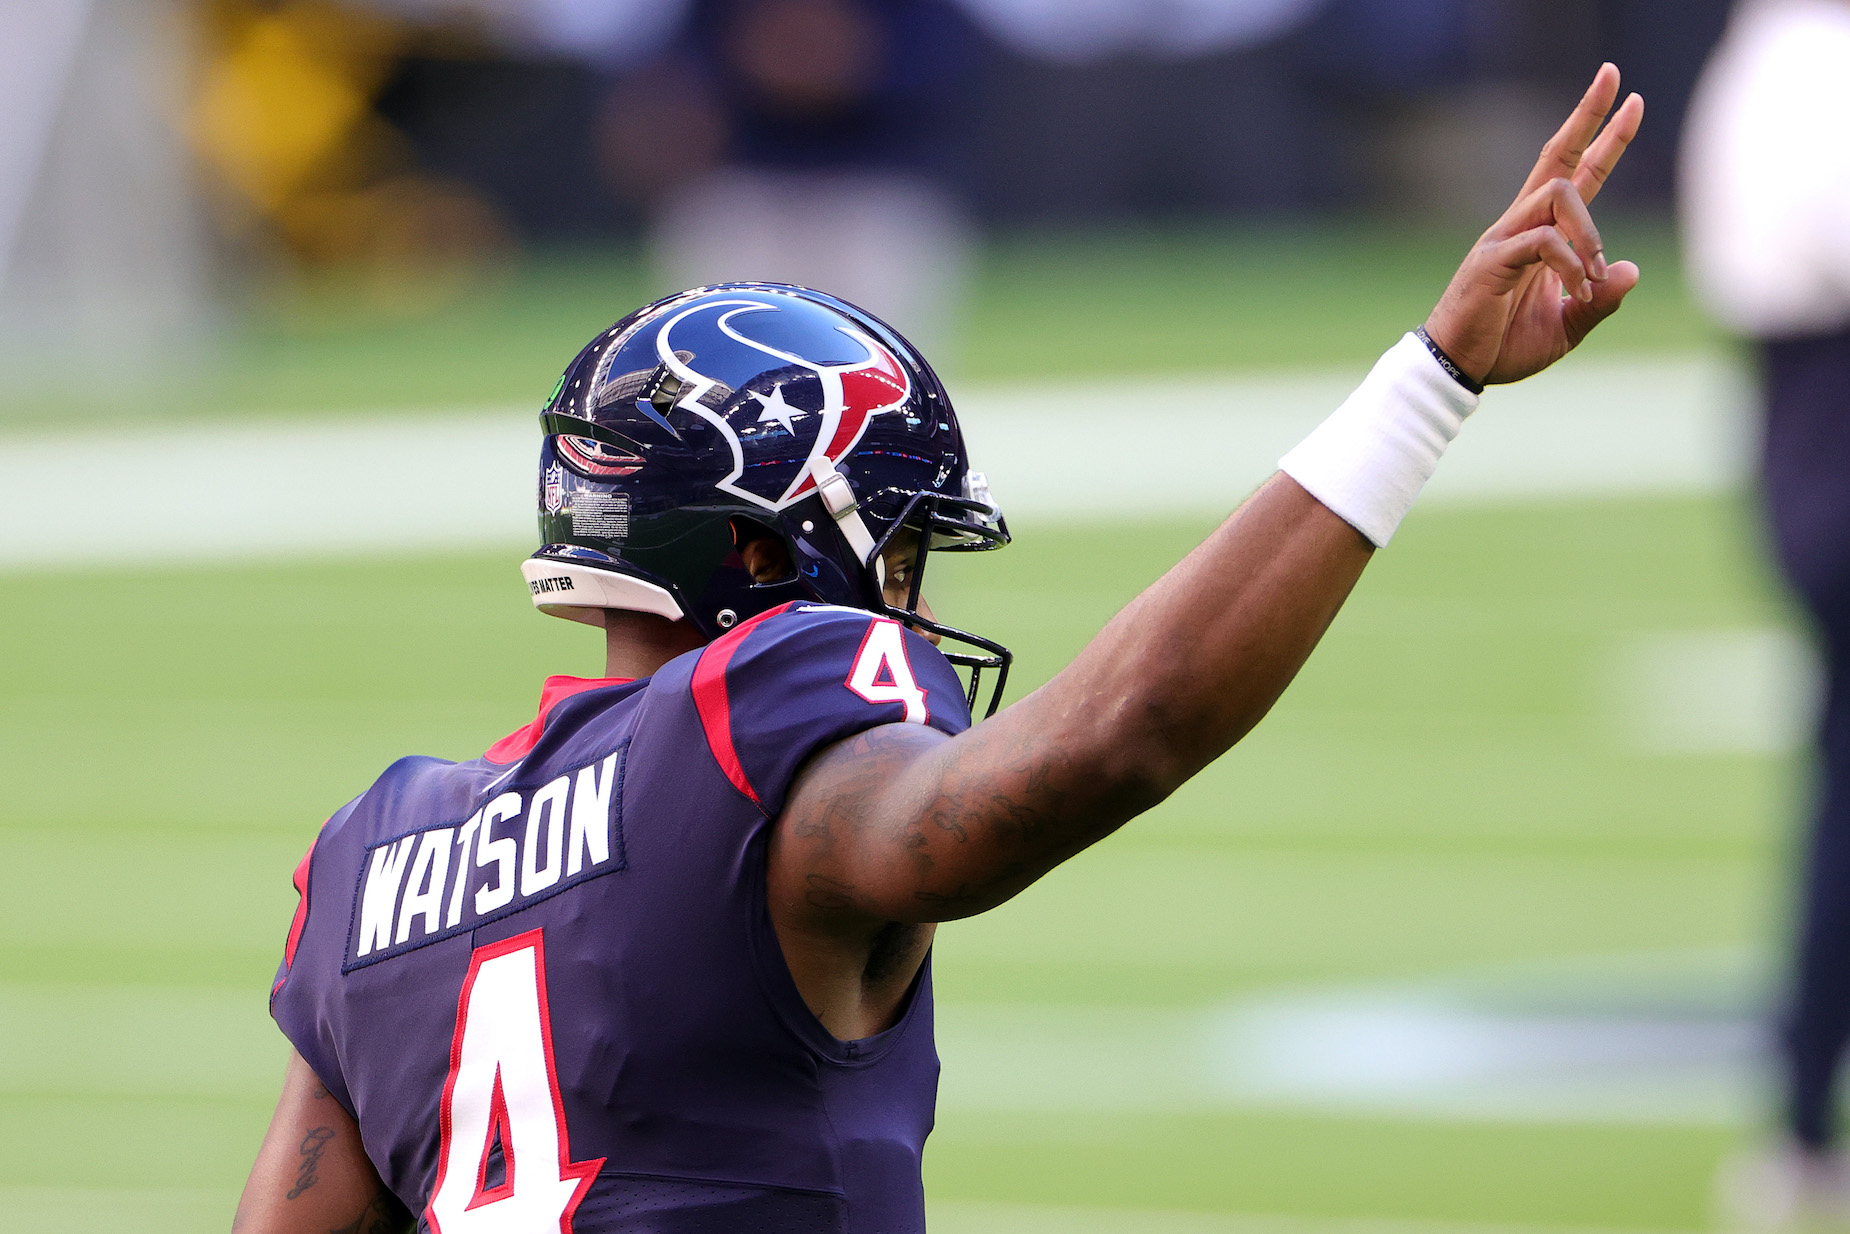 While Deshaun Watson has proven to be a star, he's not happy with the Houston Texans.